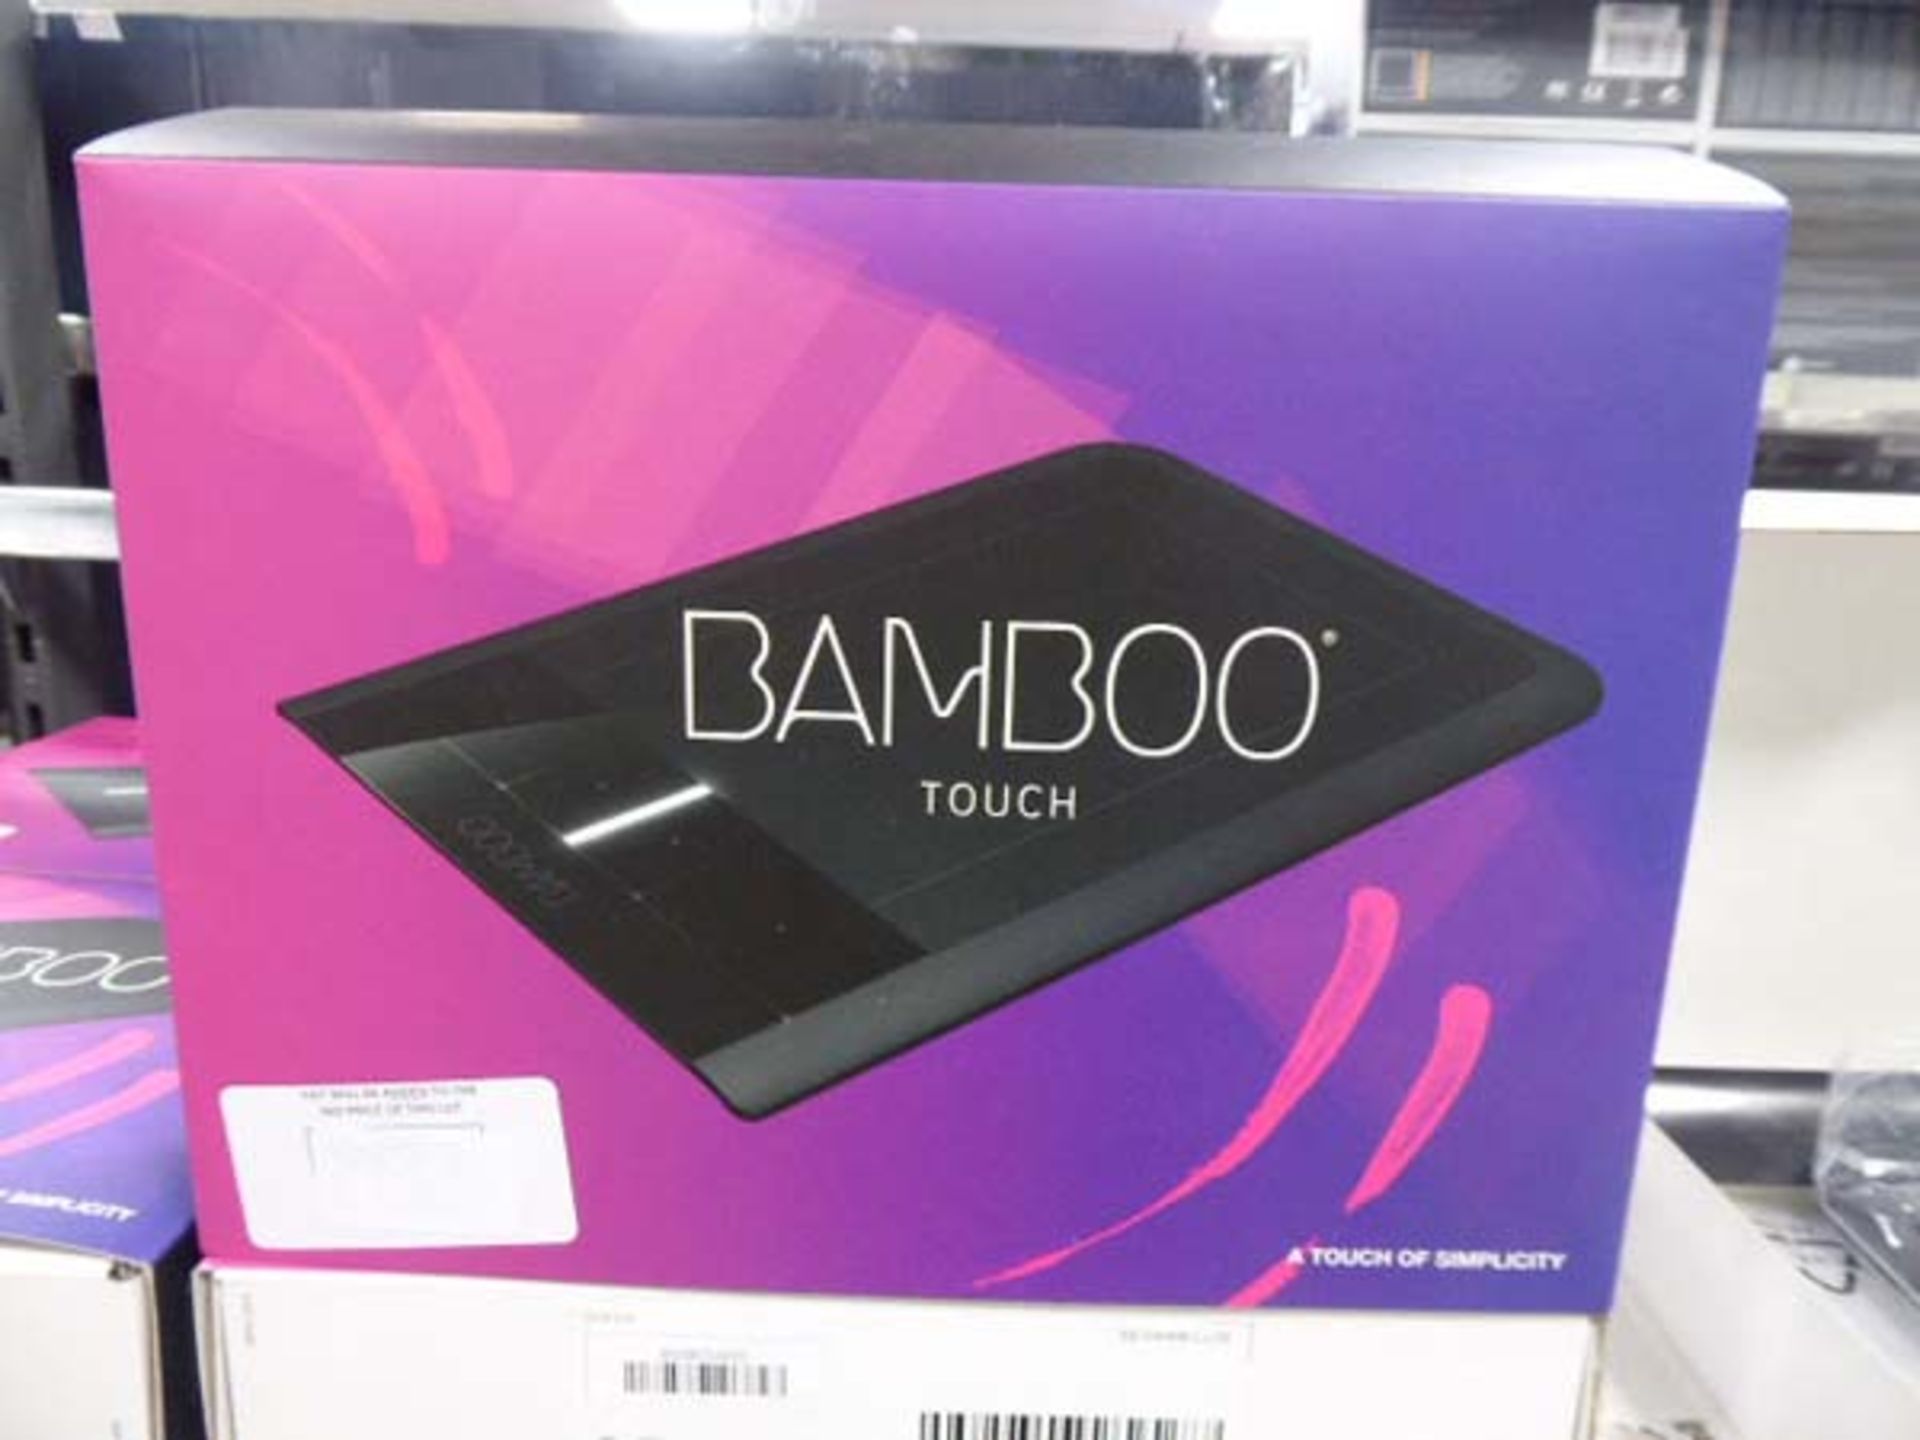 Bamboo Touch USB touch pad in box